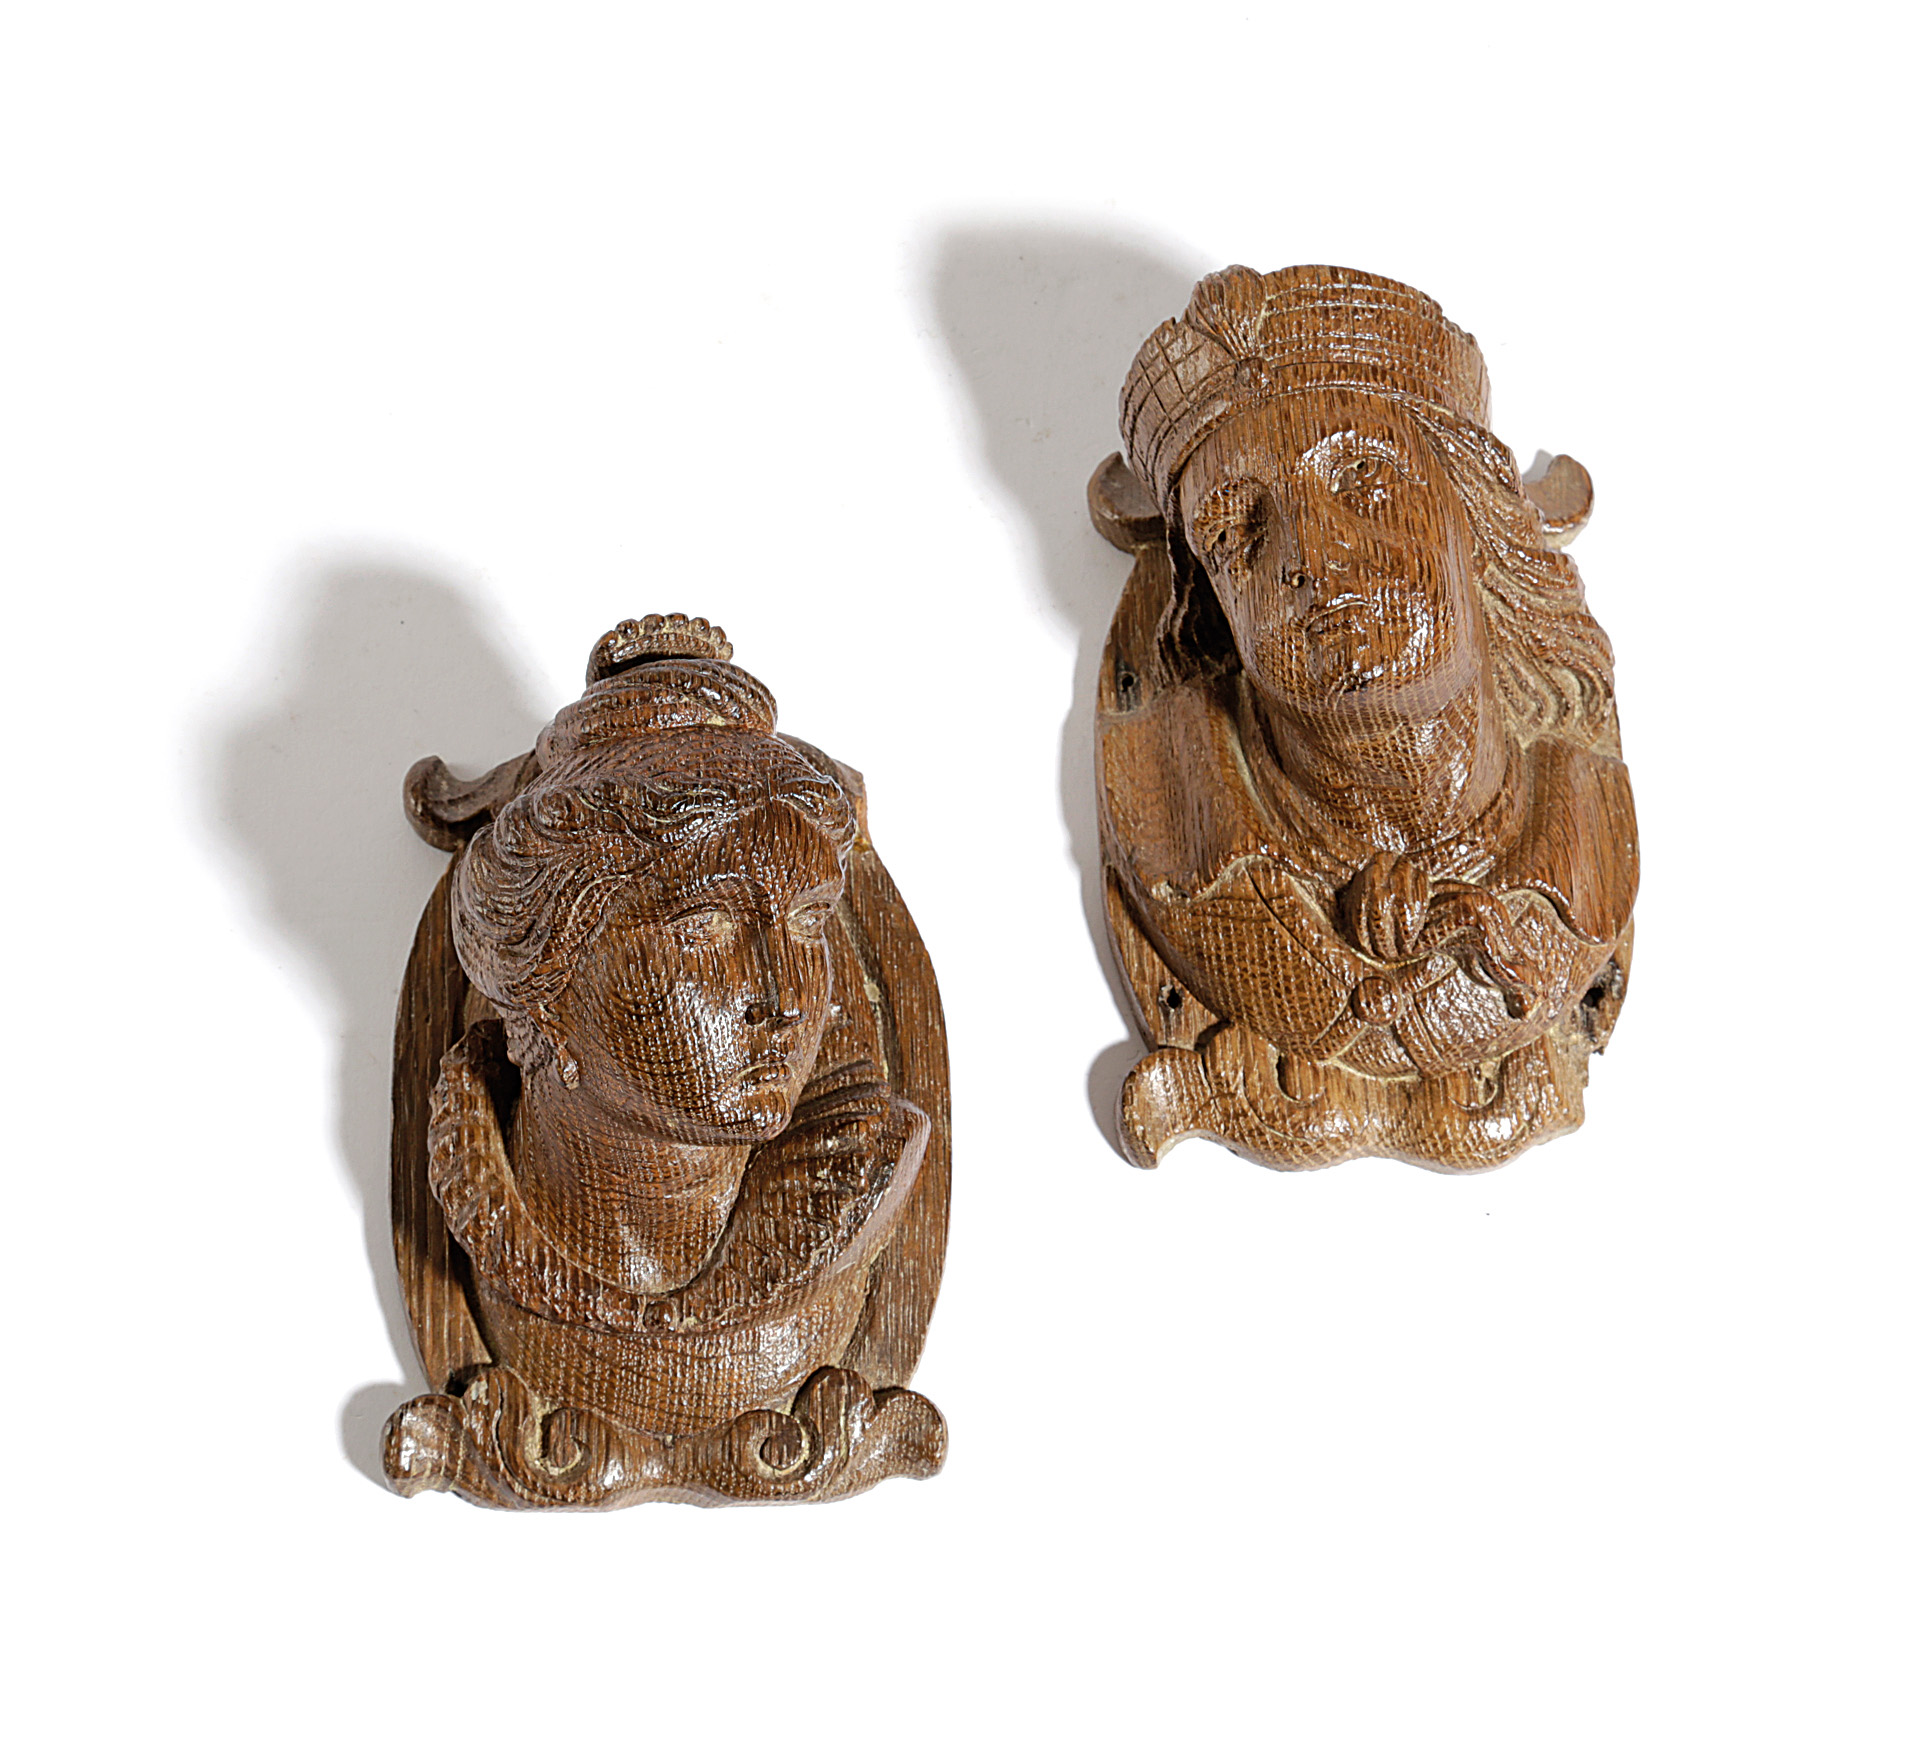 A PAIR OF CONTINENTAL OAK ARCHITECTURAL FRAGMENT BUSTS 17TH / 18TH CENTURY of a Queen and a young